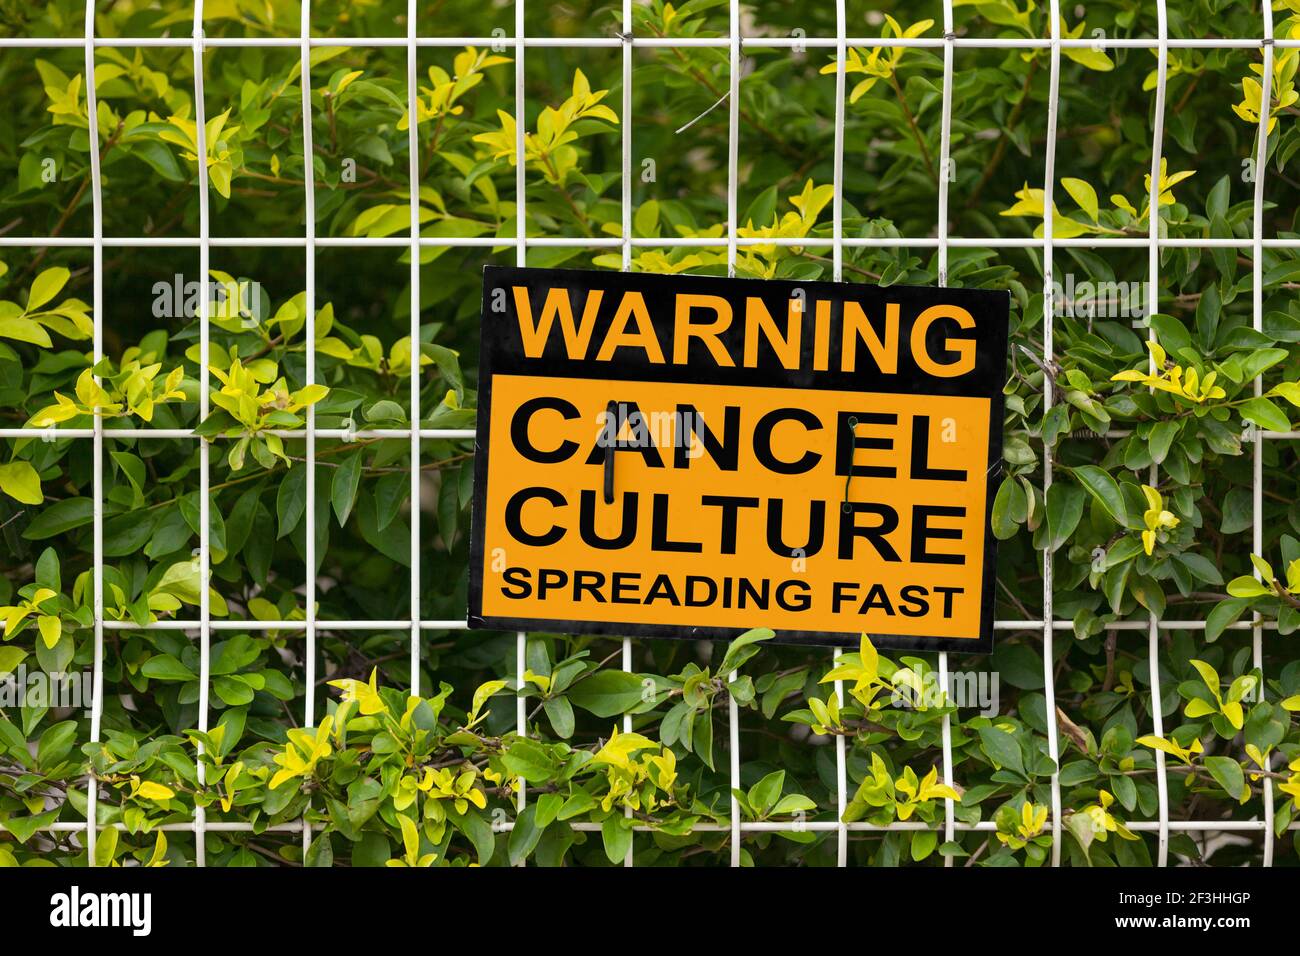 Black and yellow warning sign on a fence stating 'Warning, cancel culture spreading fast'. Stock Photo